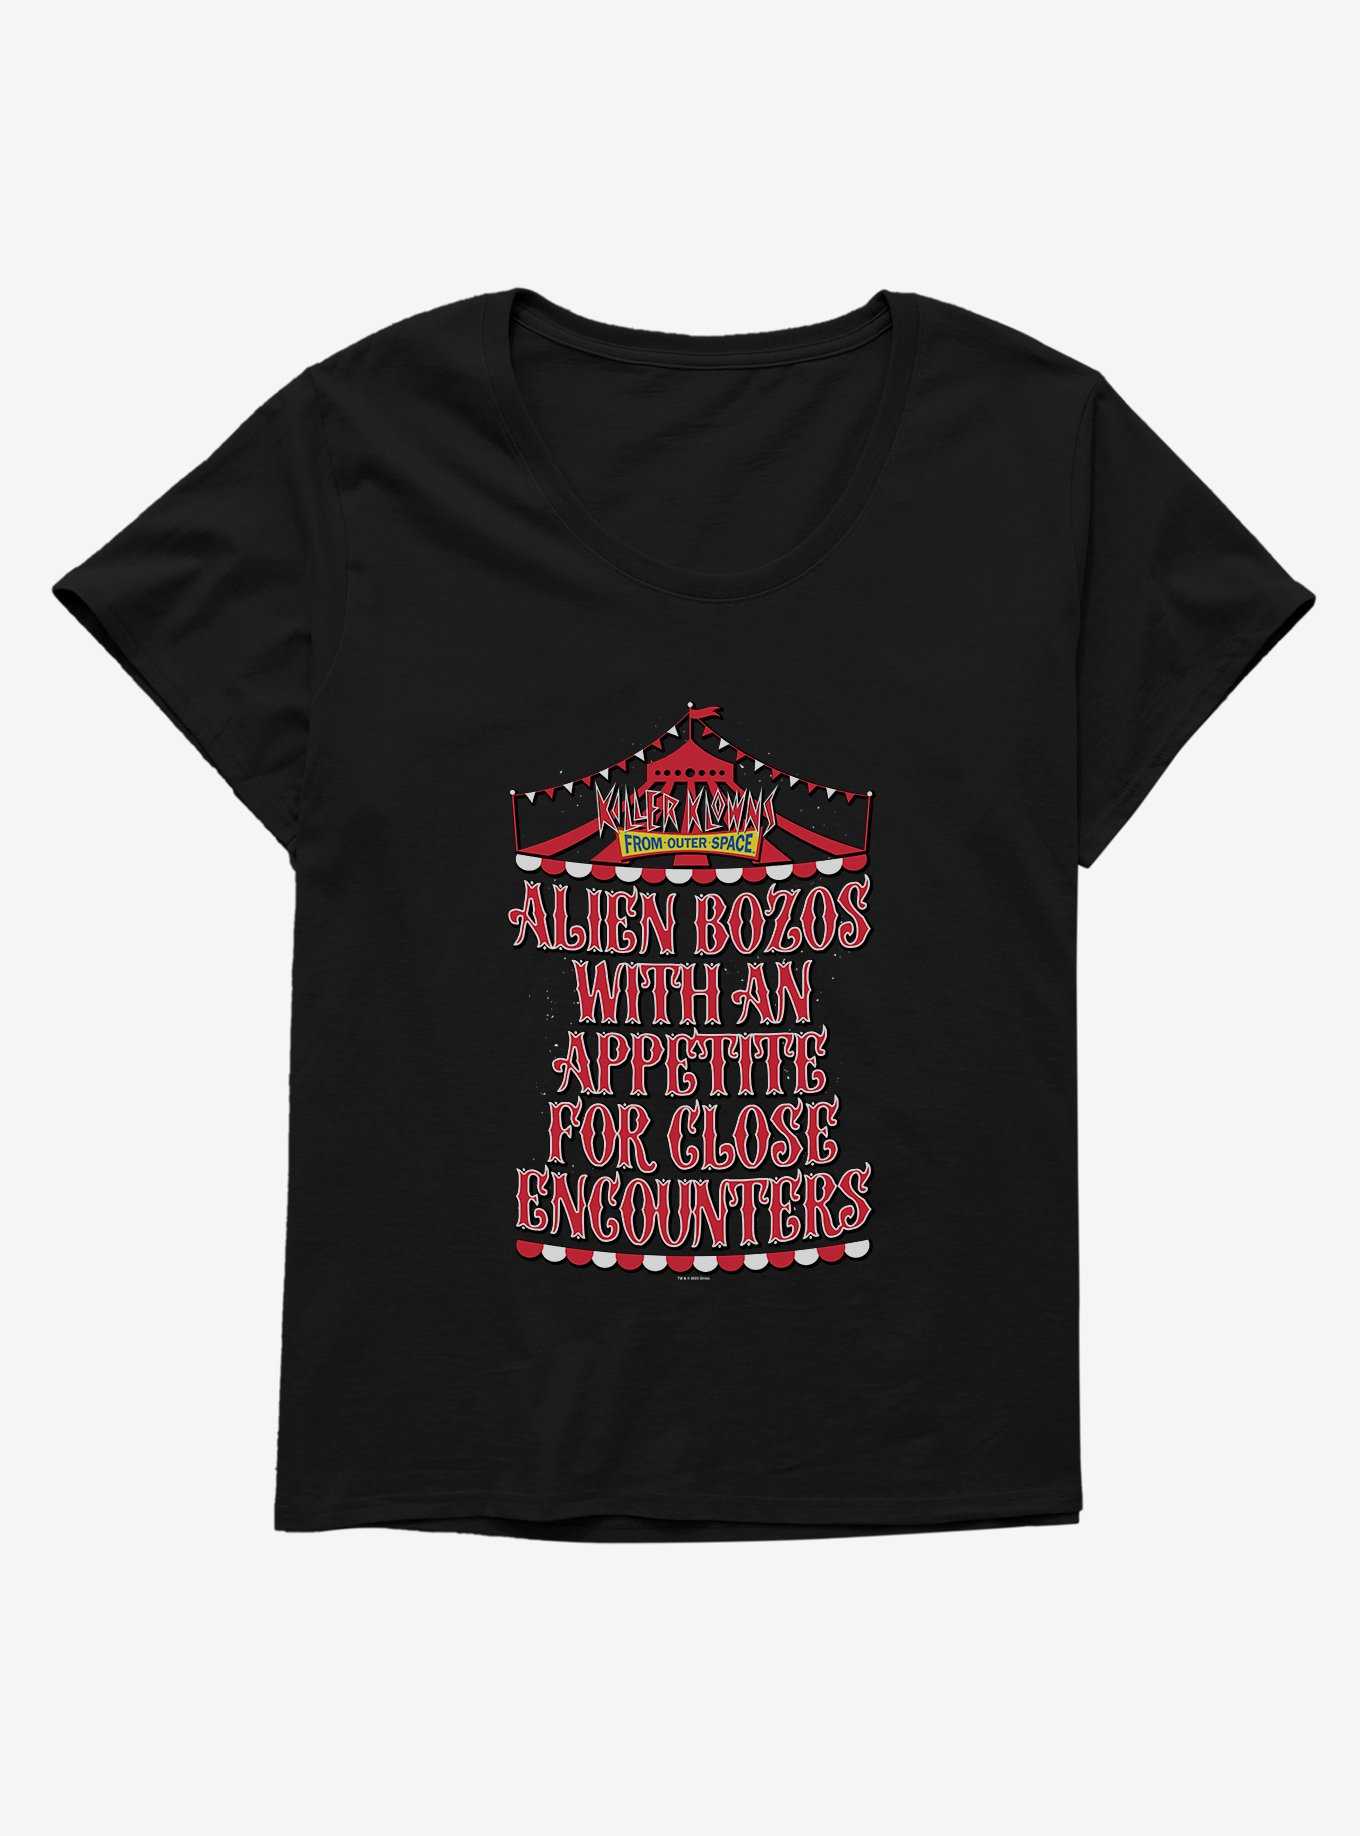 Killer Klowns From Outer Space Alien Bozos With An Apetite For Close Encounters Girls T-Shirt Plus Size, , hi-res